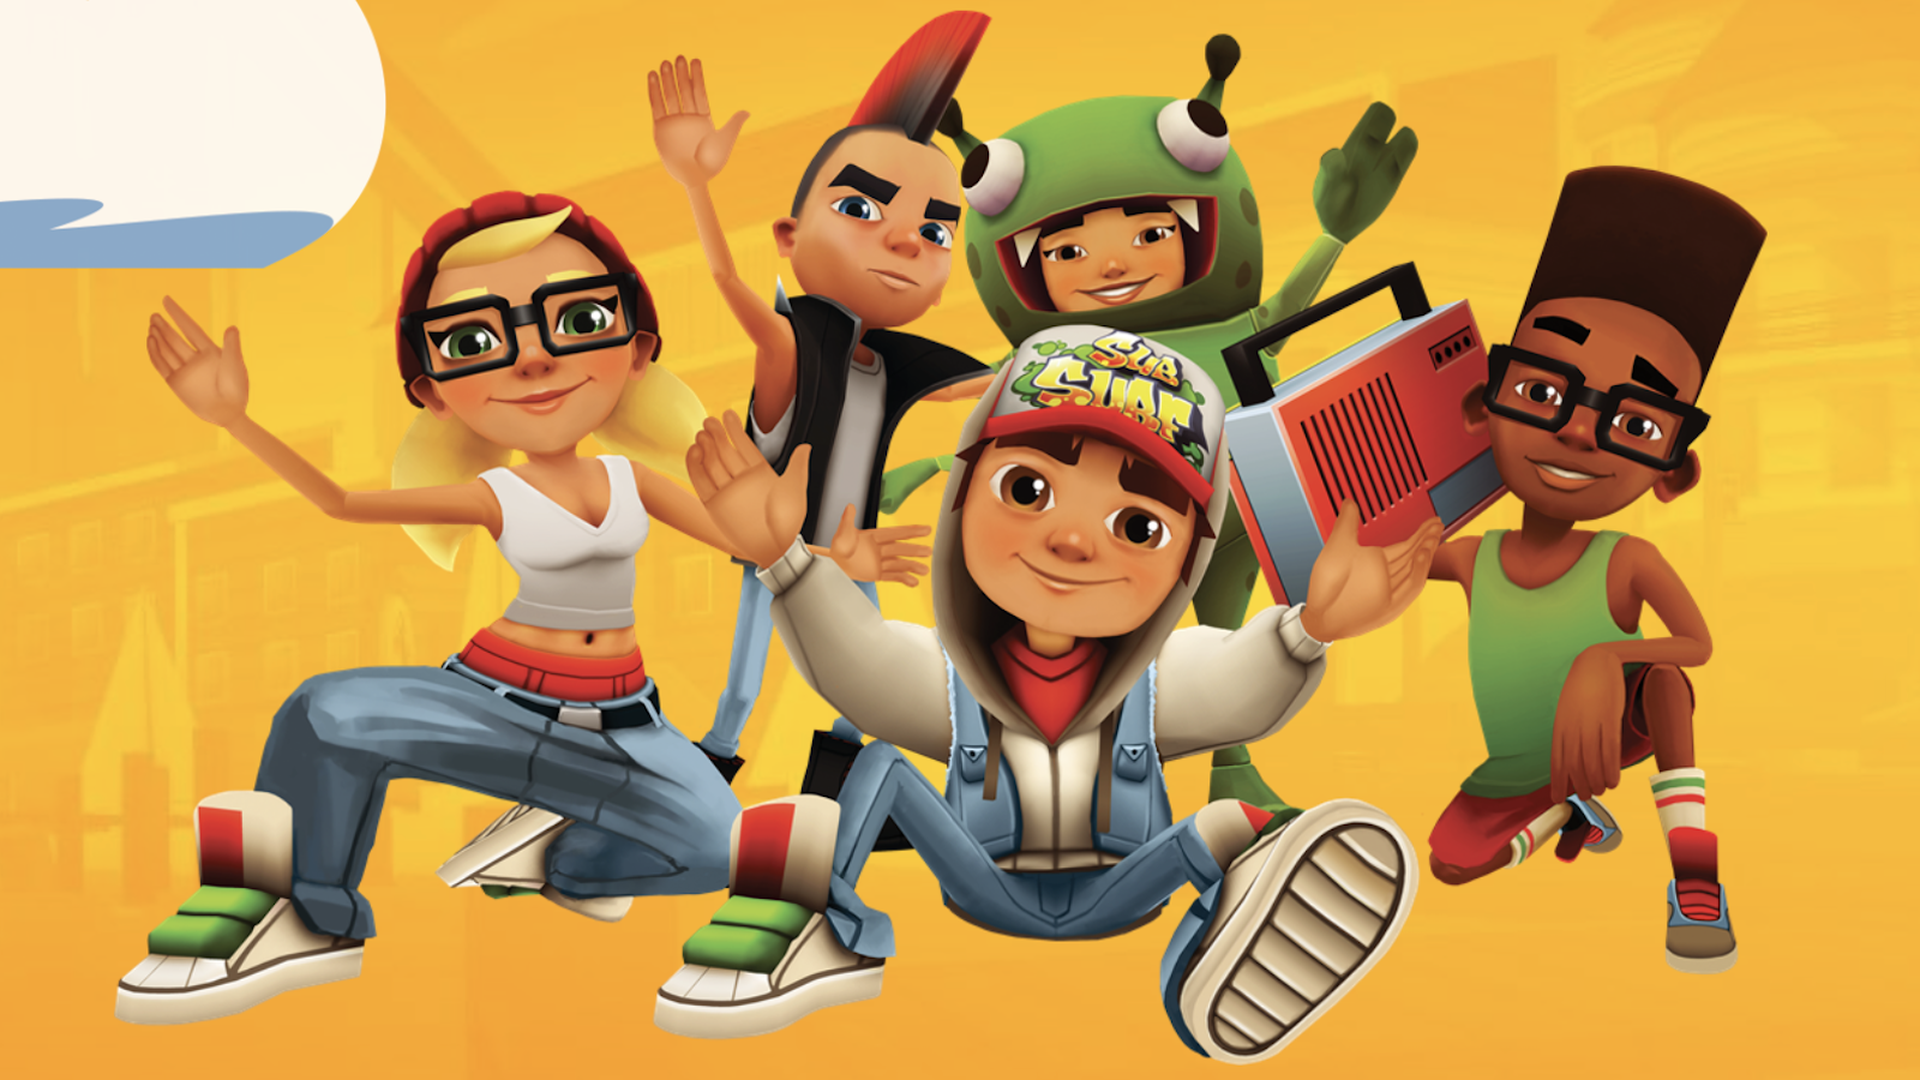 Characters from Subway Surfers, whose studio was purchased by Tencent. 